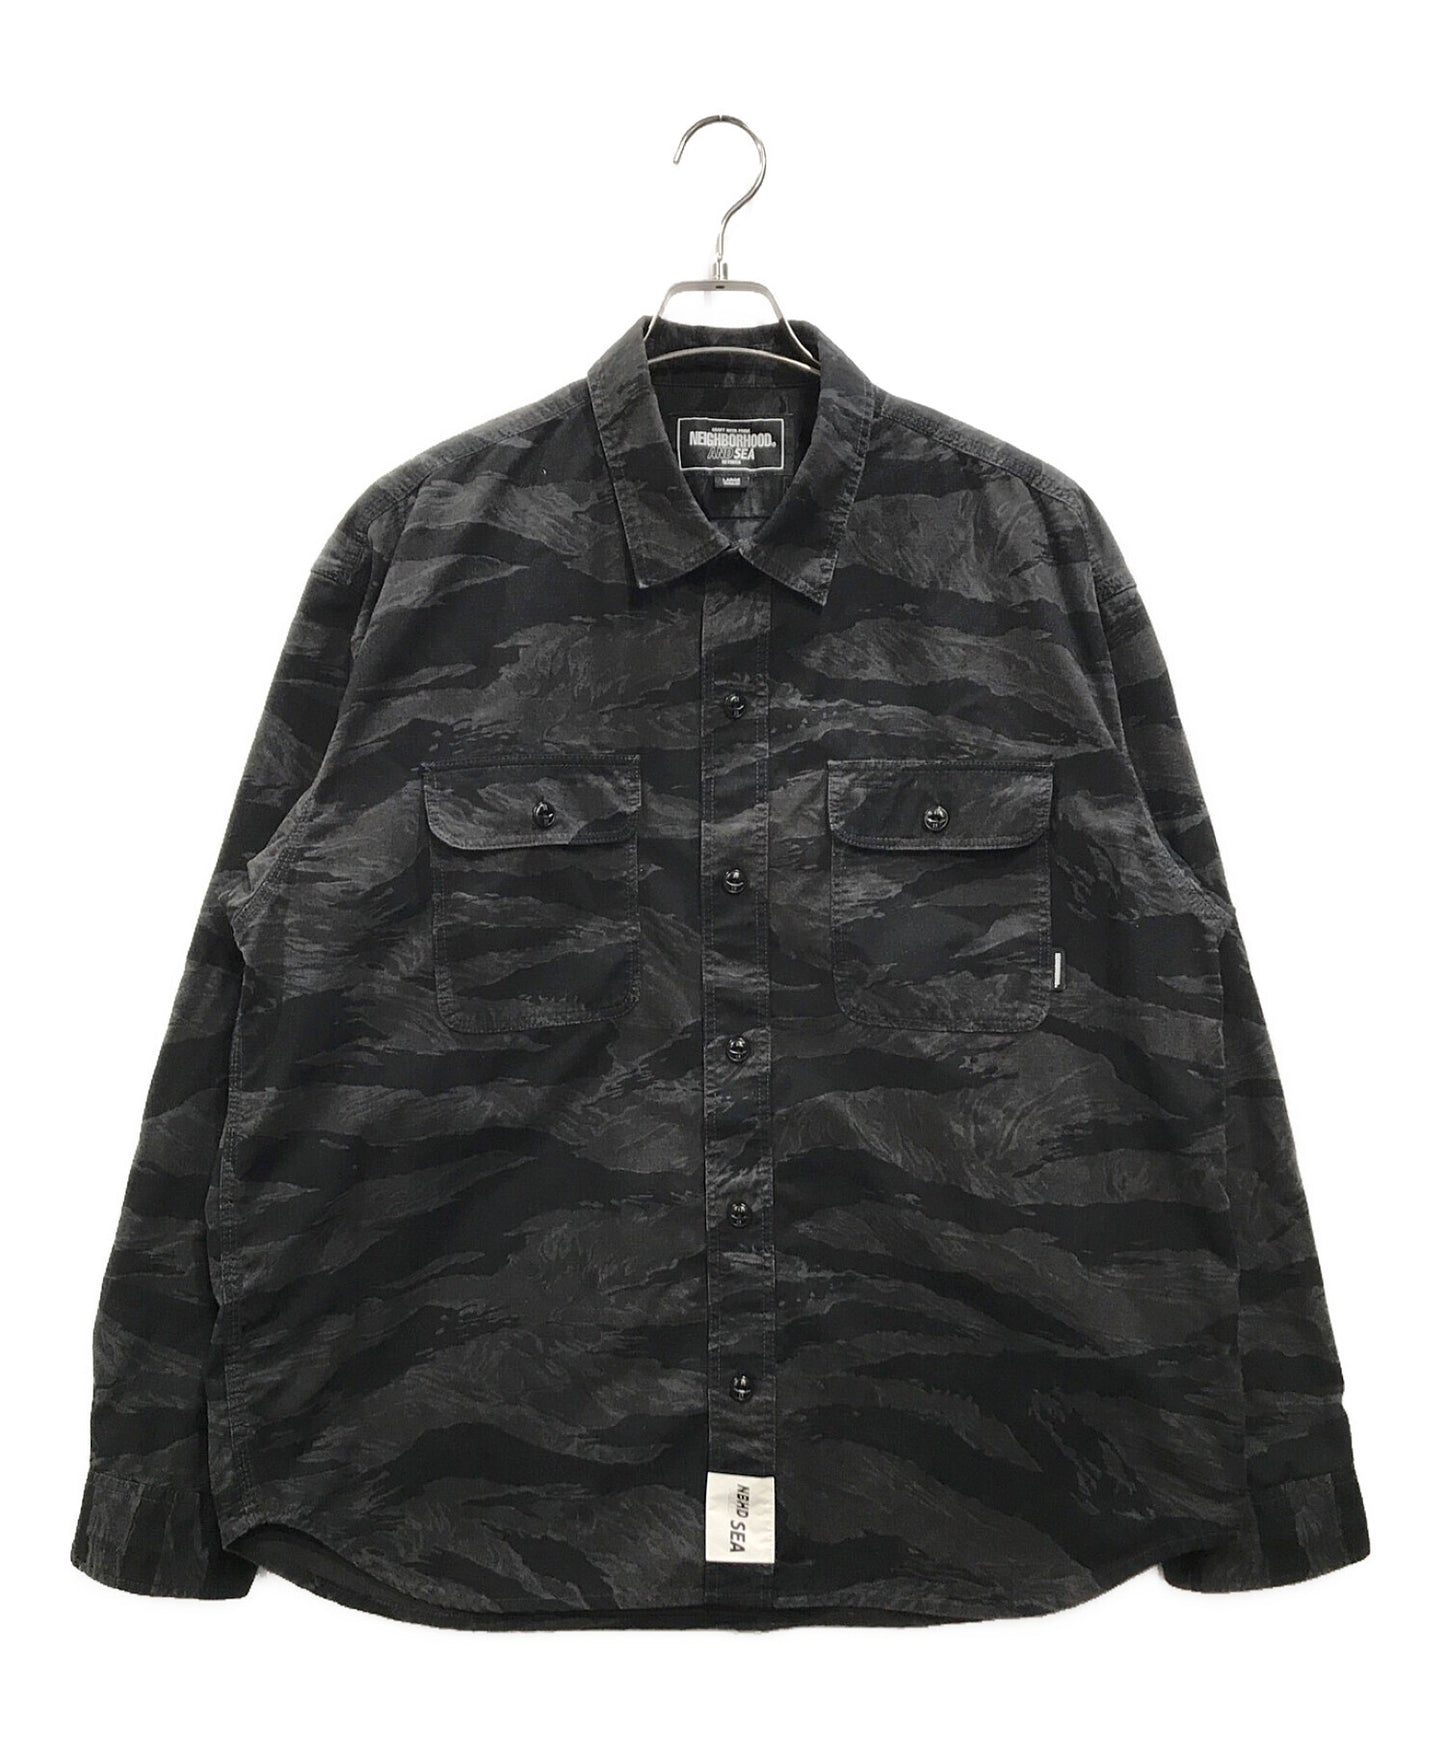 [Pre-owned] NEIGHBORHOOD CAMOUFLAGE OFFICER SHIRT LS Camouflage shirt 231AQWSN-SHM02S